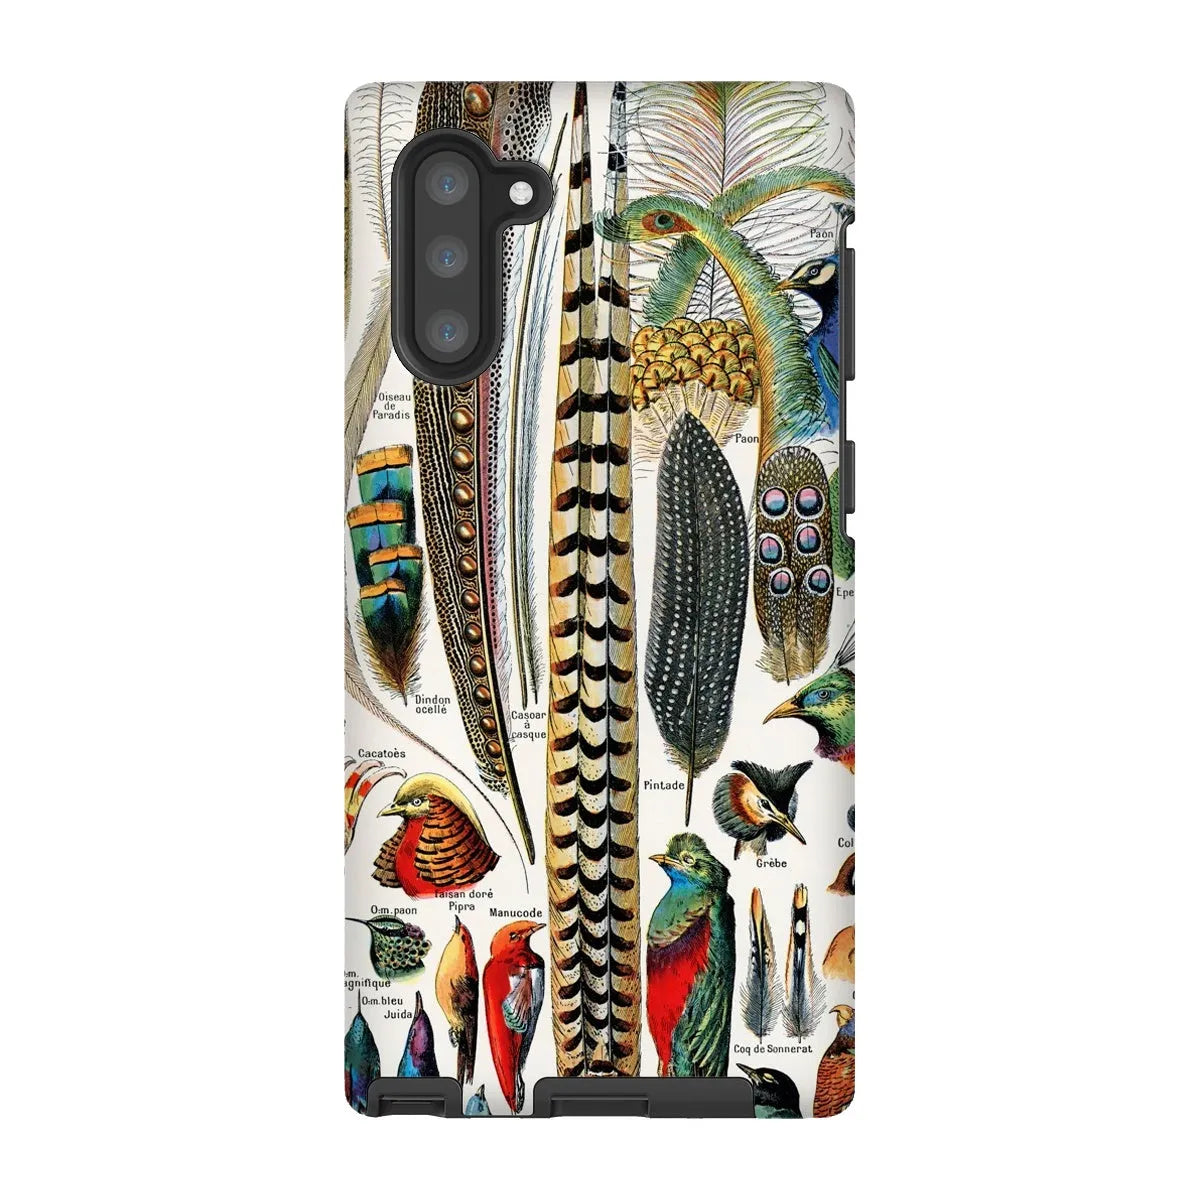 Plumes - Feathers By Adolphe Millot Tough Phone Case - Samsung Galaxy Note 10 / Matte - Aesthetic Art